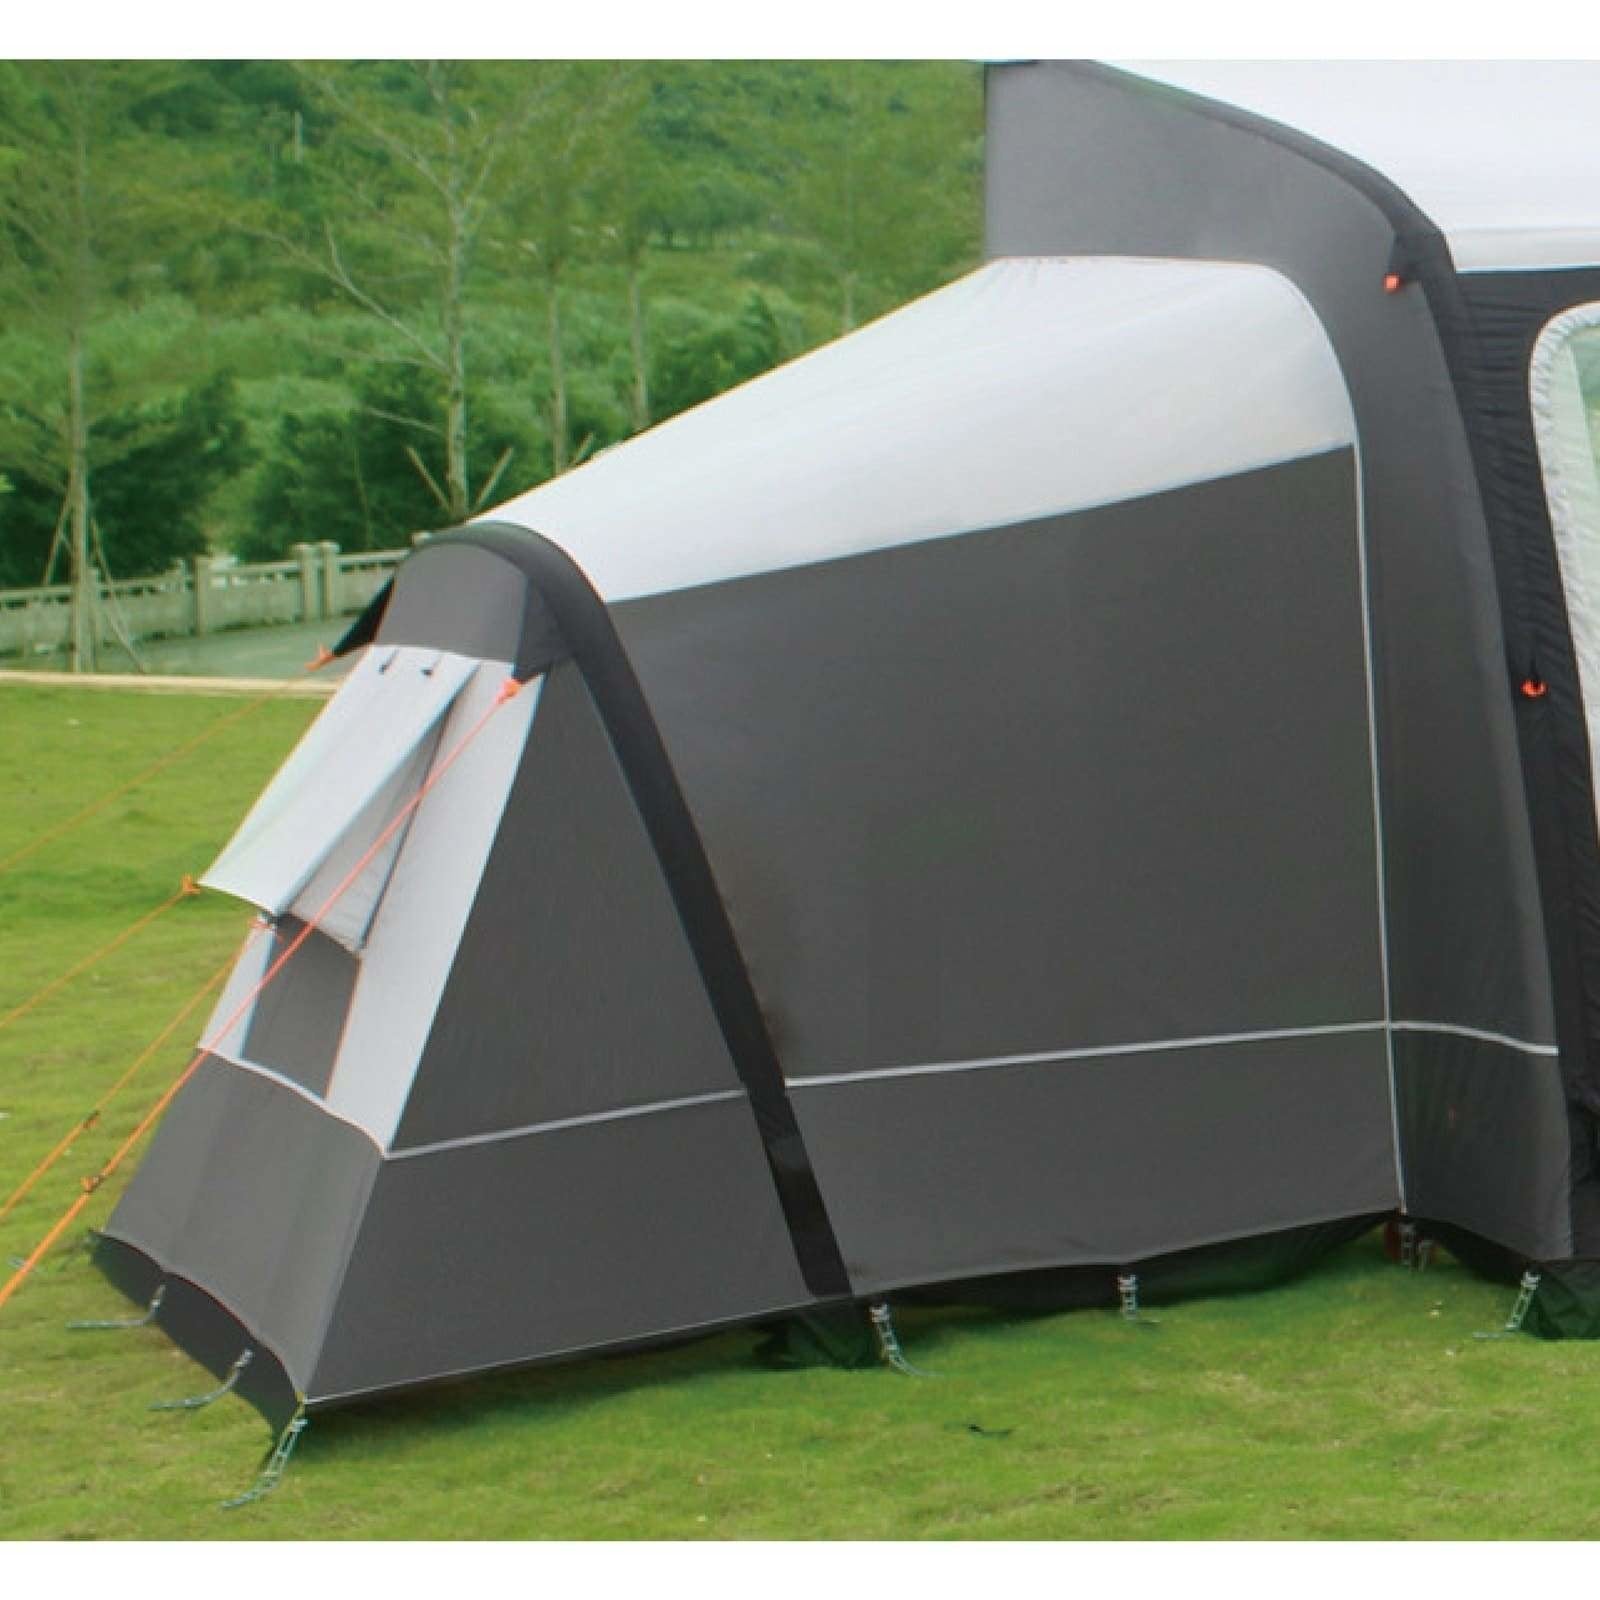 Camptech Starline Annex for Starline Caravan Awnings (2019) made by CampTech. A Annex sold by Quality Caravan Awnings